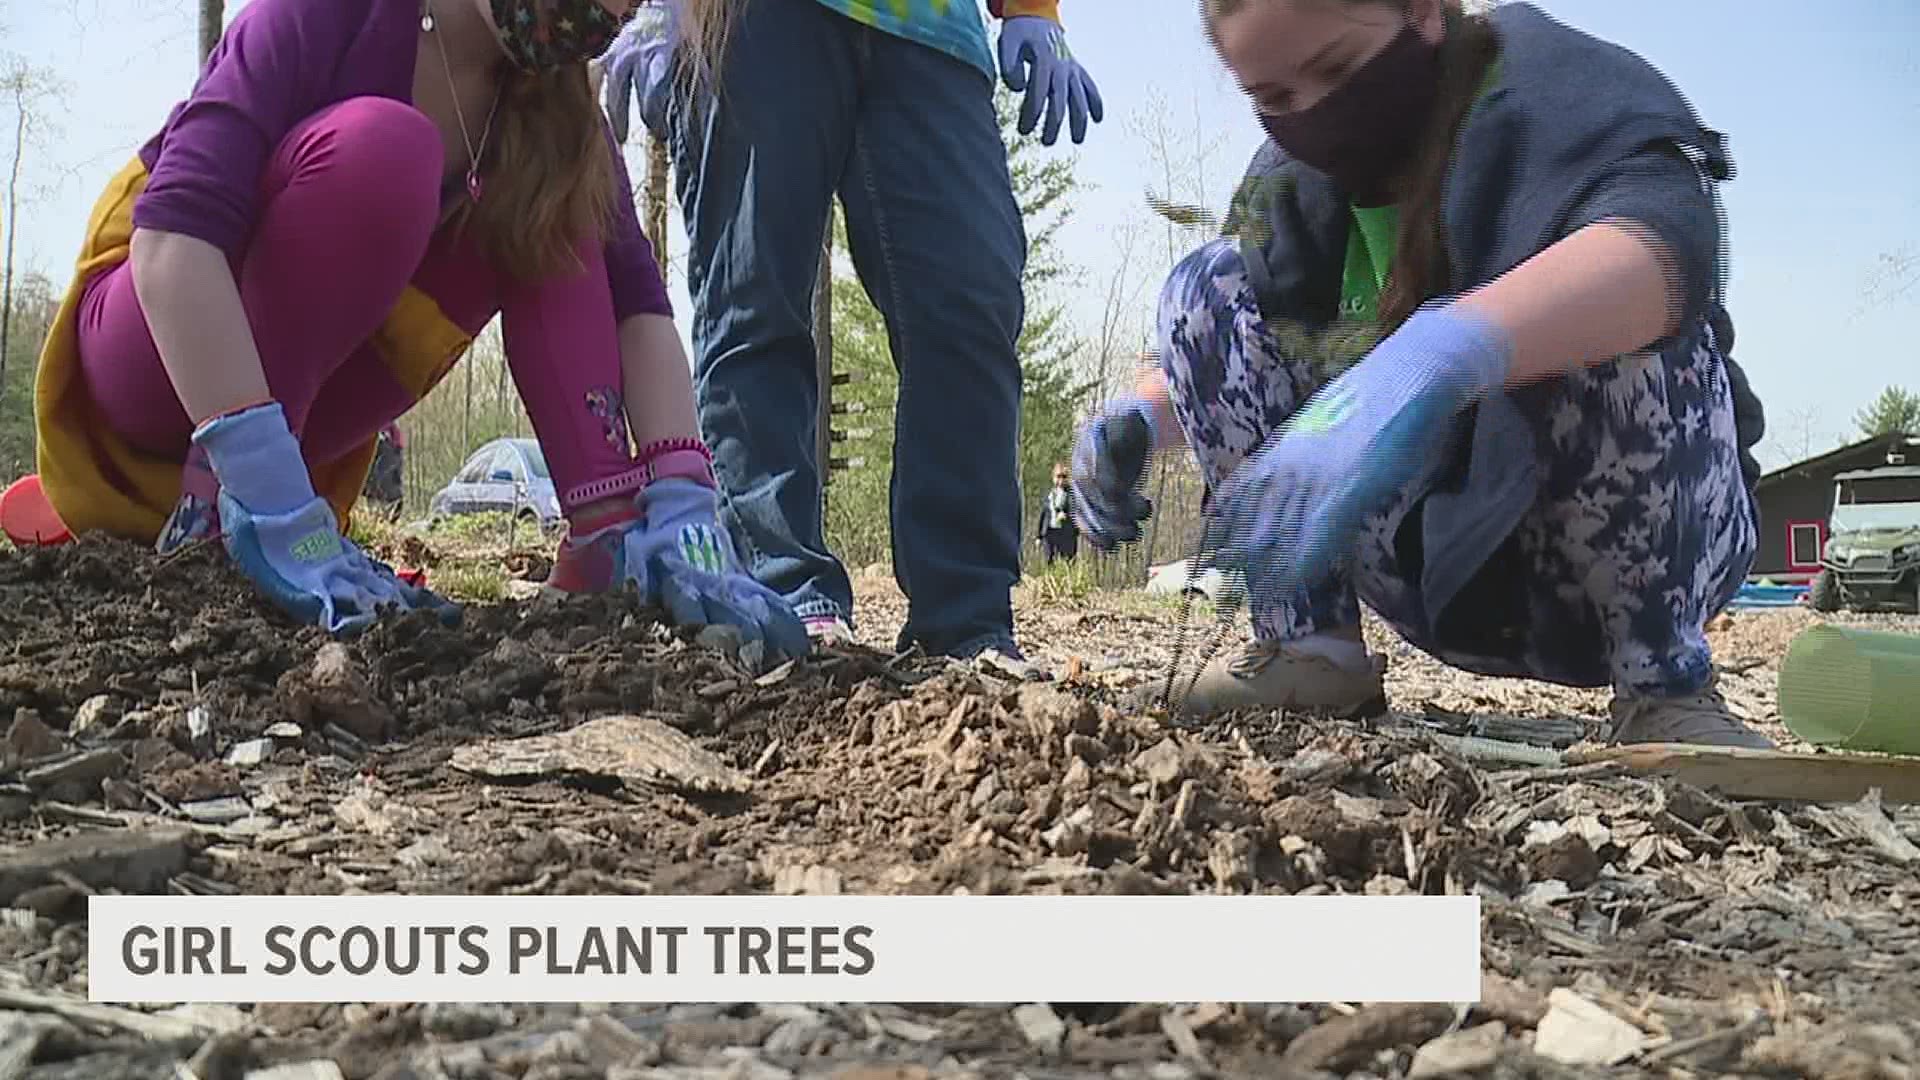 This event is a part of a nationwide conservation initiative to plant 5 million trees in five years.